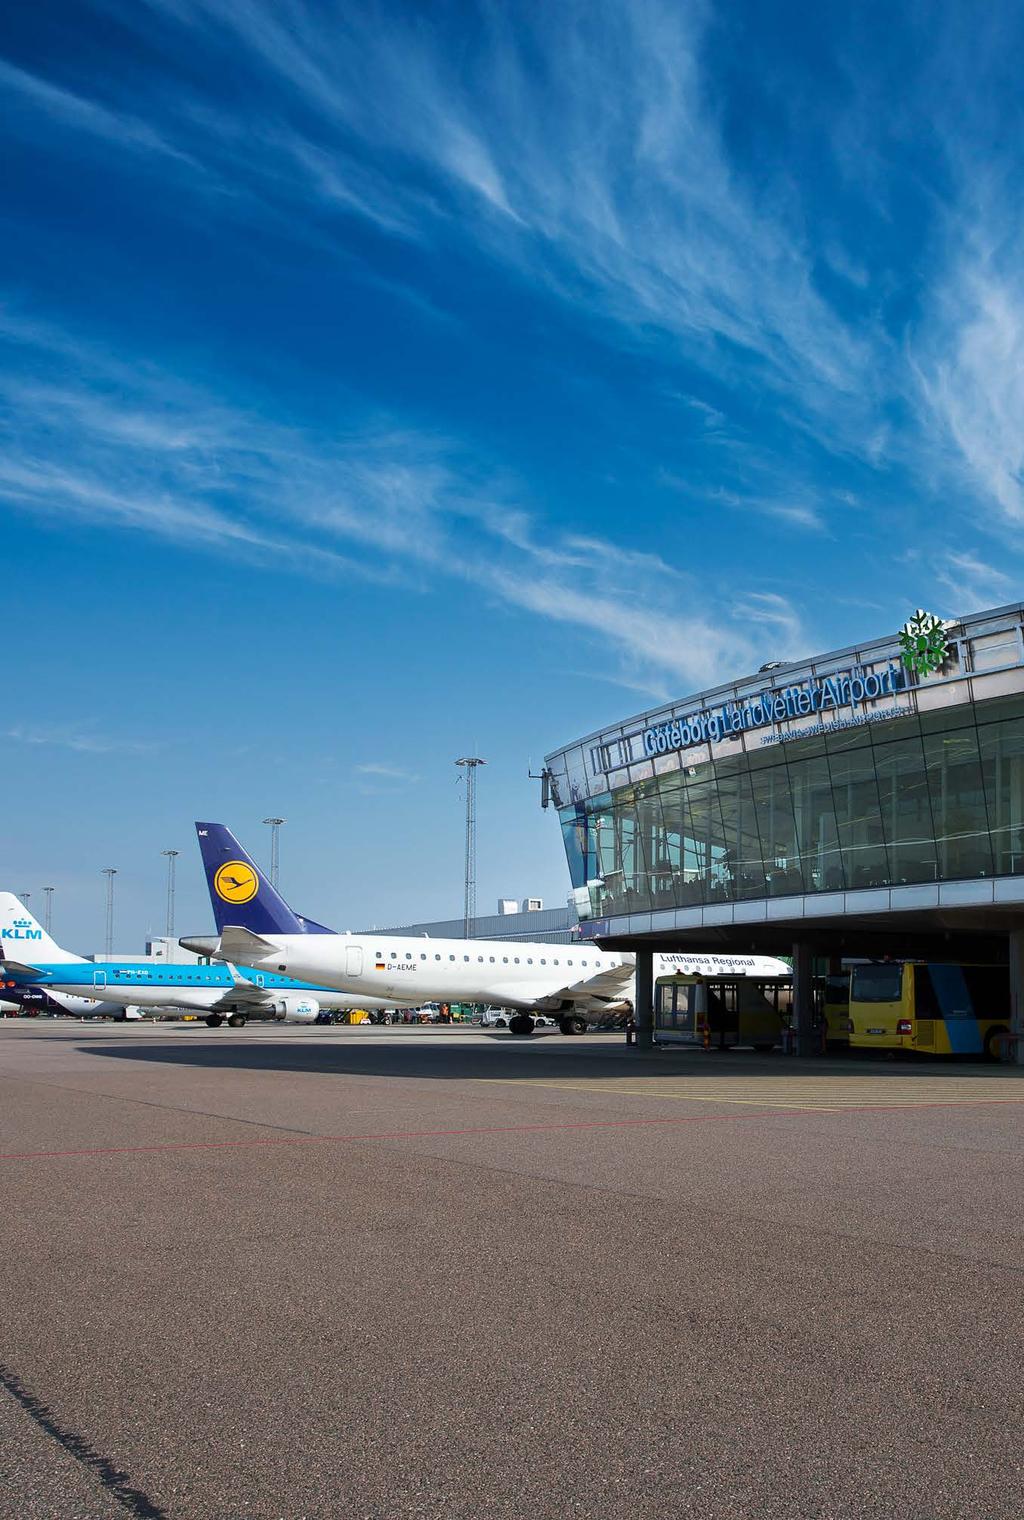 The airport Swedavia work to constantly develop and improve the ten airports to manage the increasing demand on effective national and international travels.